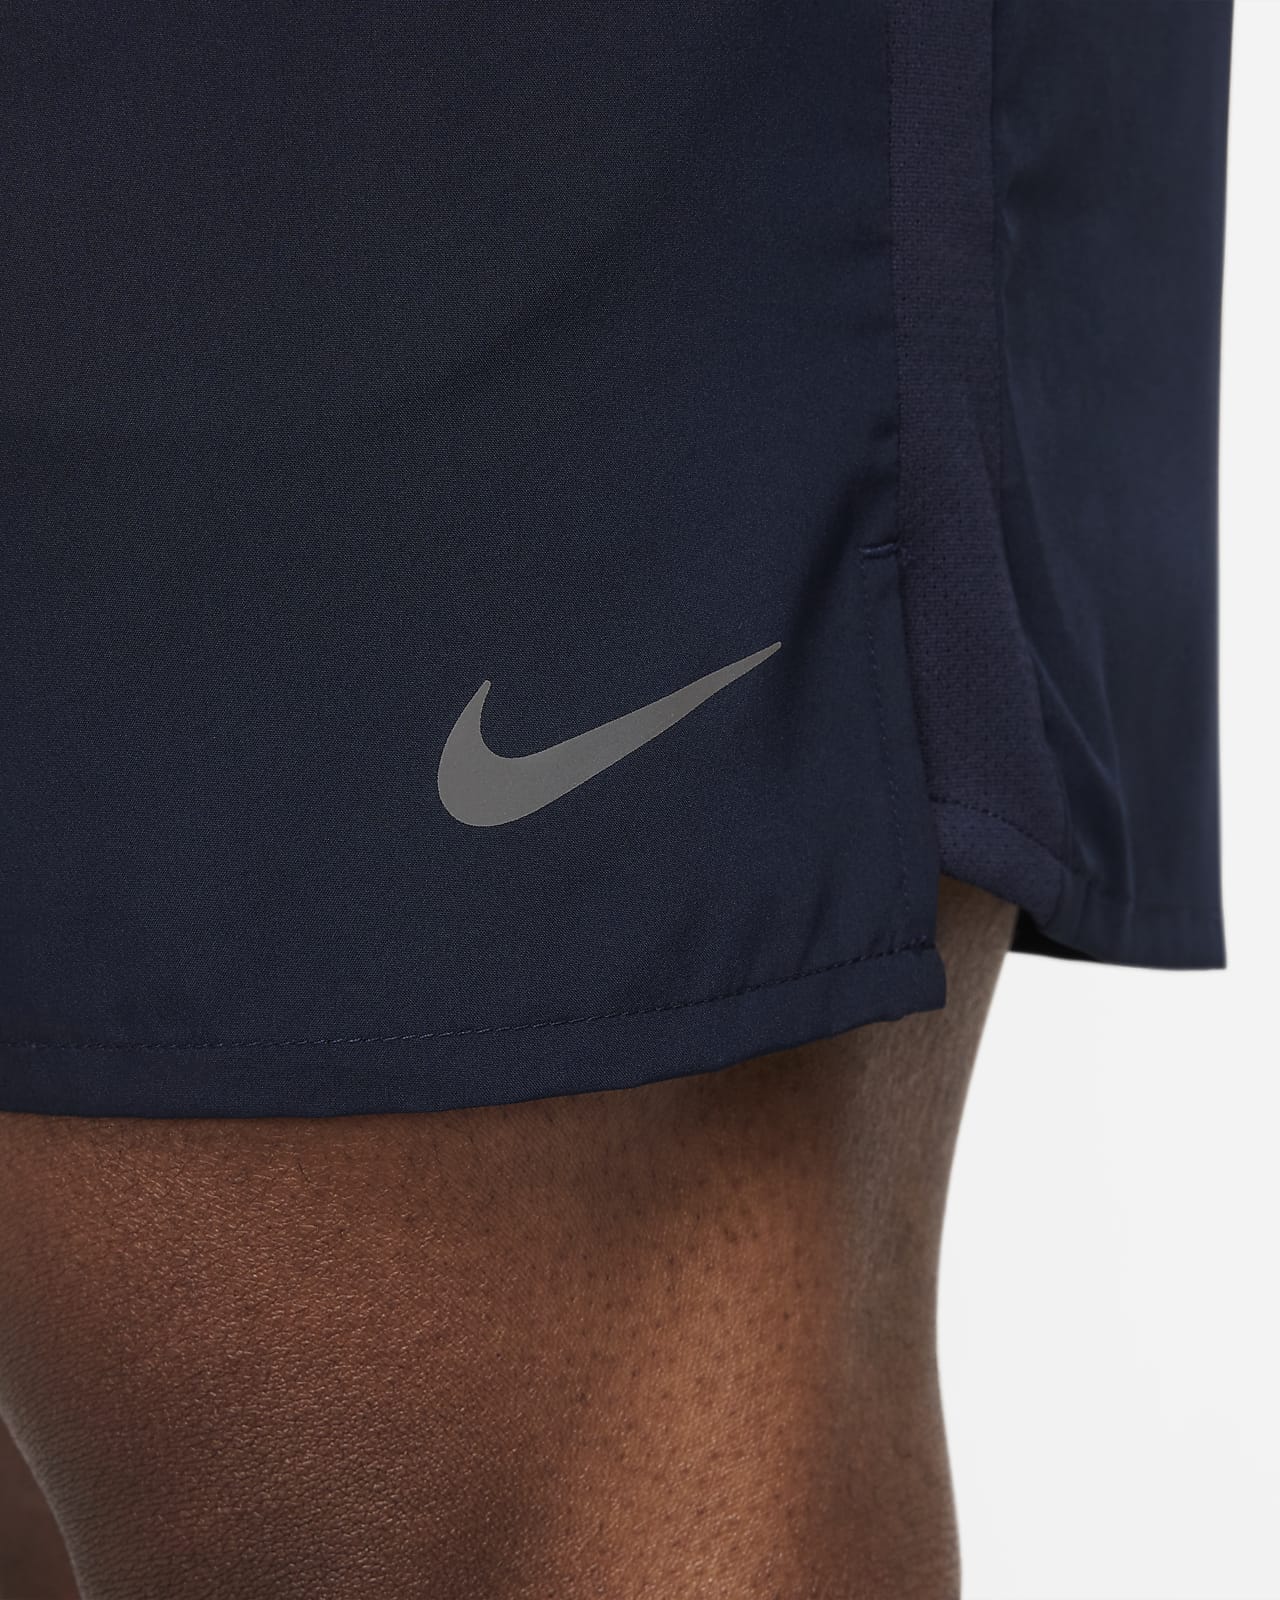 Barrio Muy lejos correr Nike Challenger Men's Dri-FIT 5" Brief-Lined Running Shorts. Nike.com